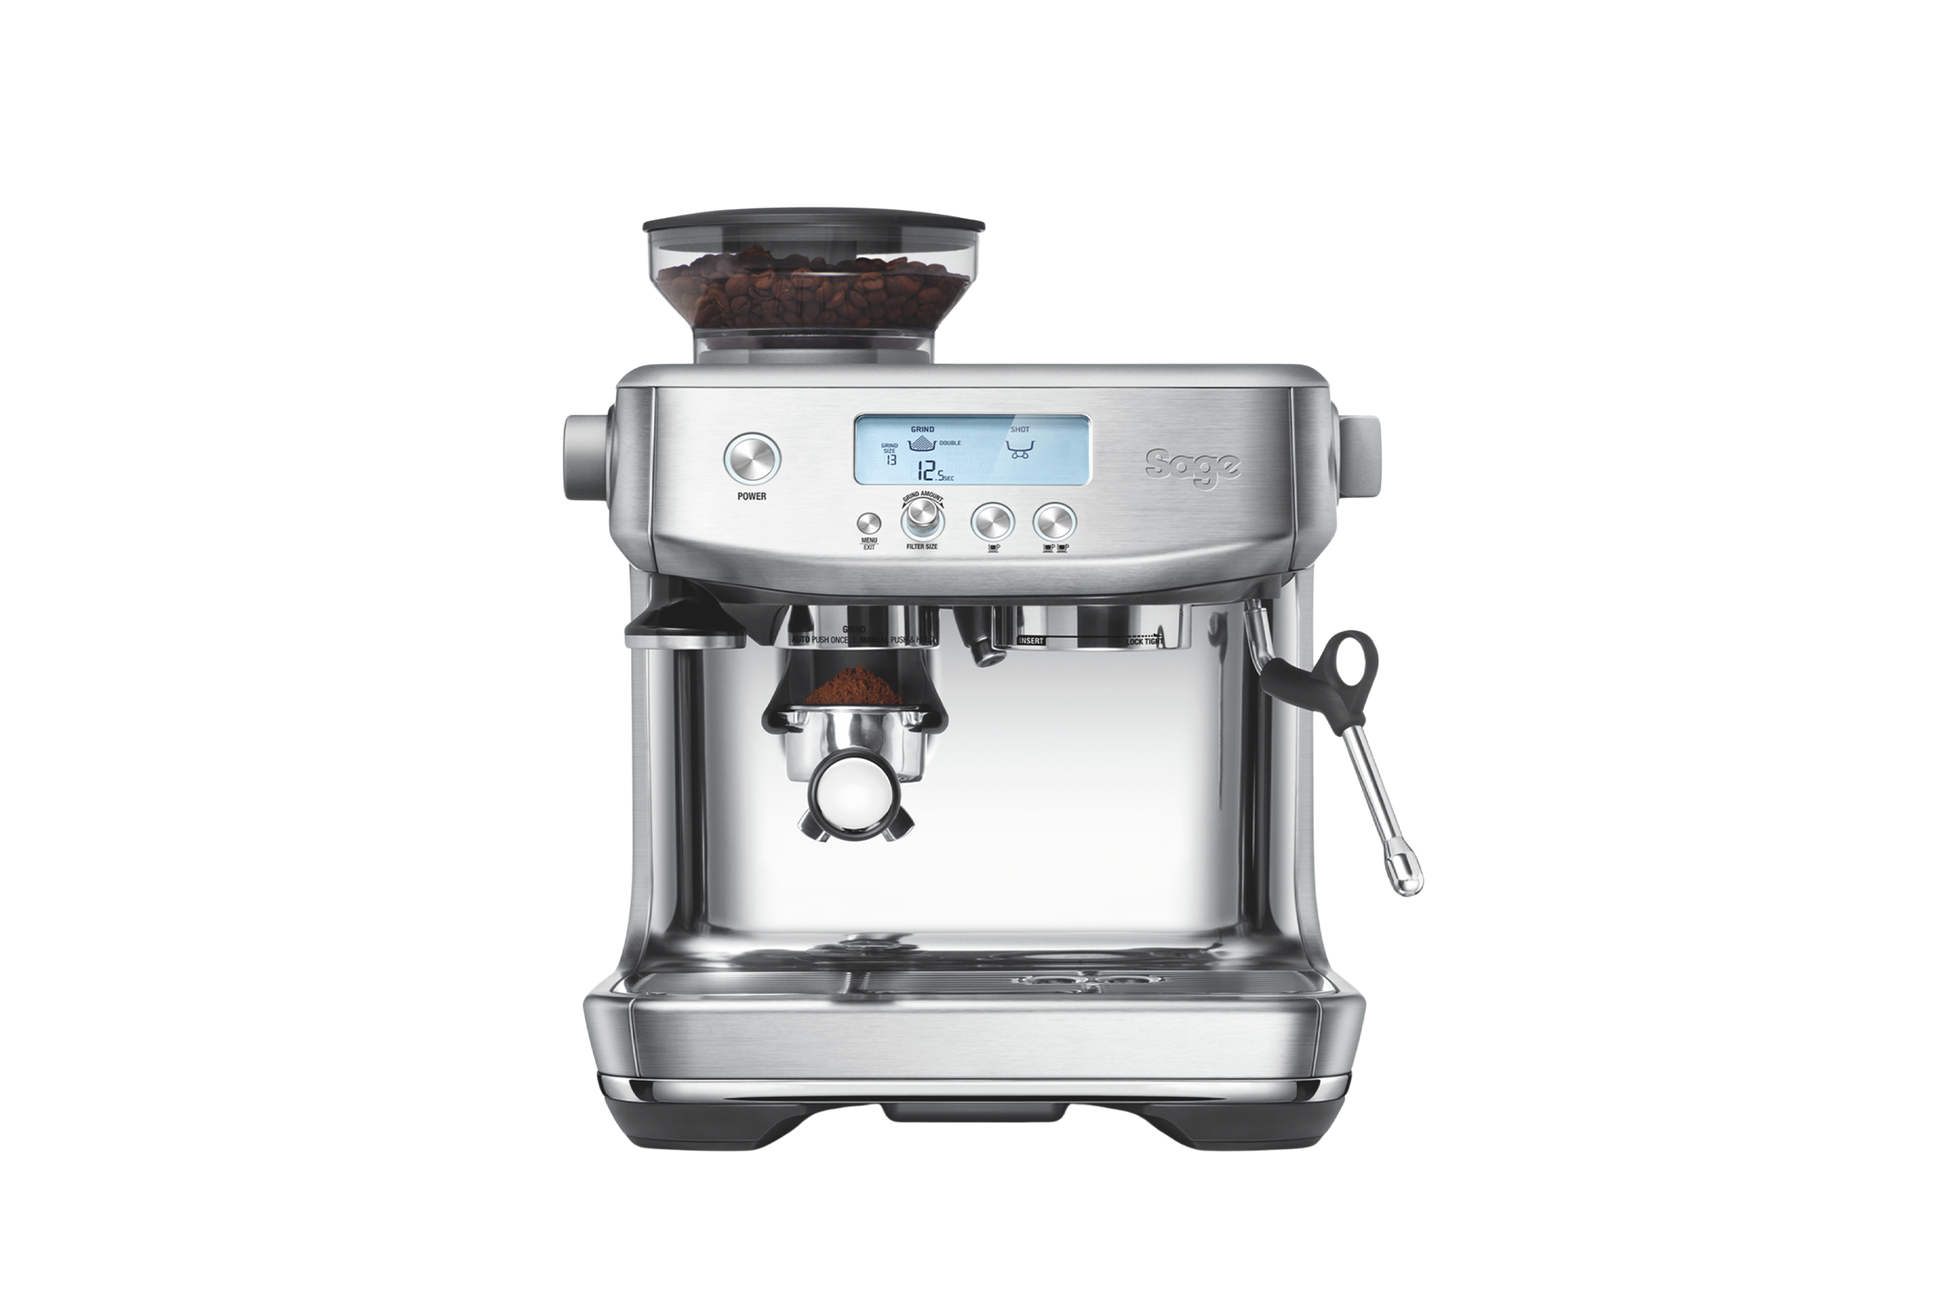 Offering barista quality performance, the Sage Barista Pro machine brings home espresso drinkers hands-on control of coffee grinding, espresso shot times & drink construction.